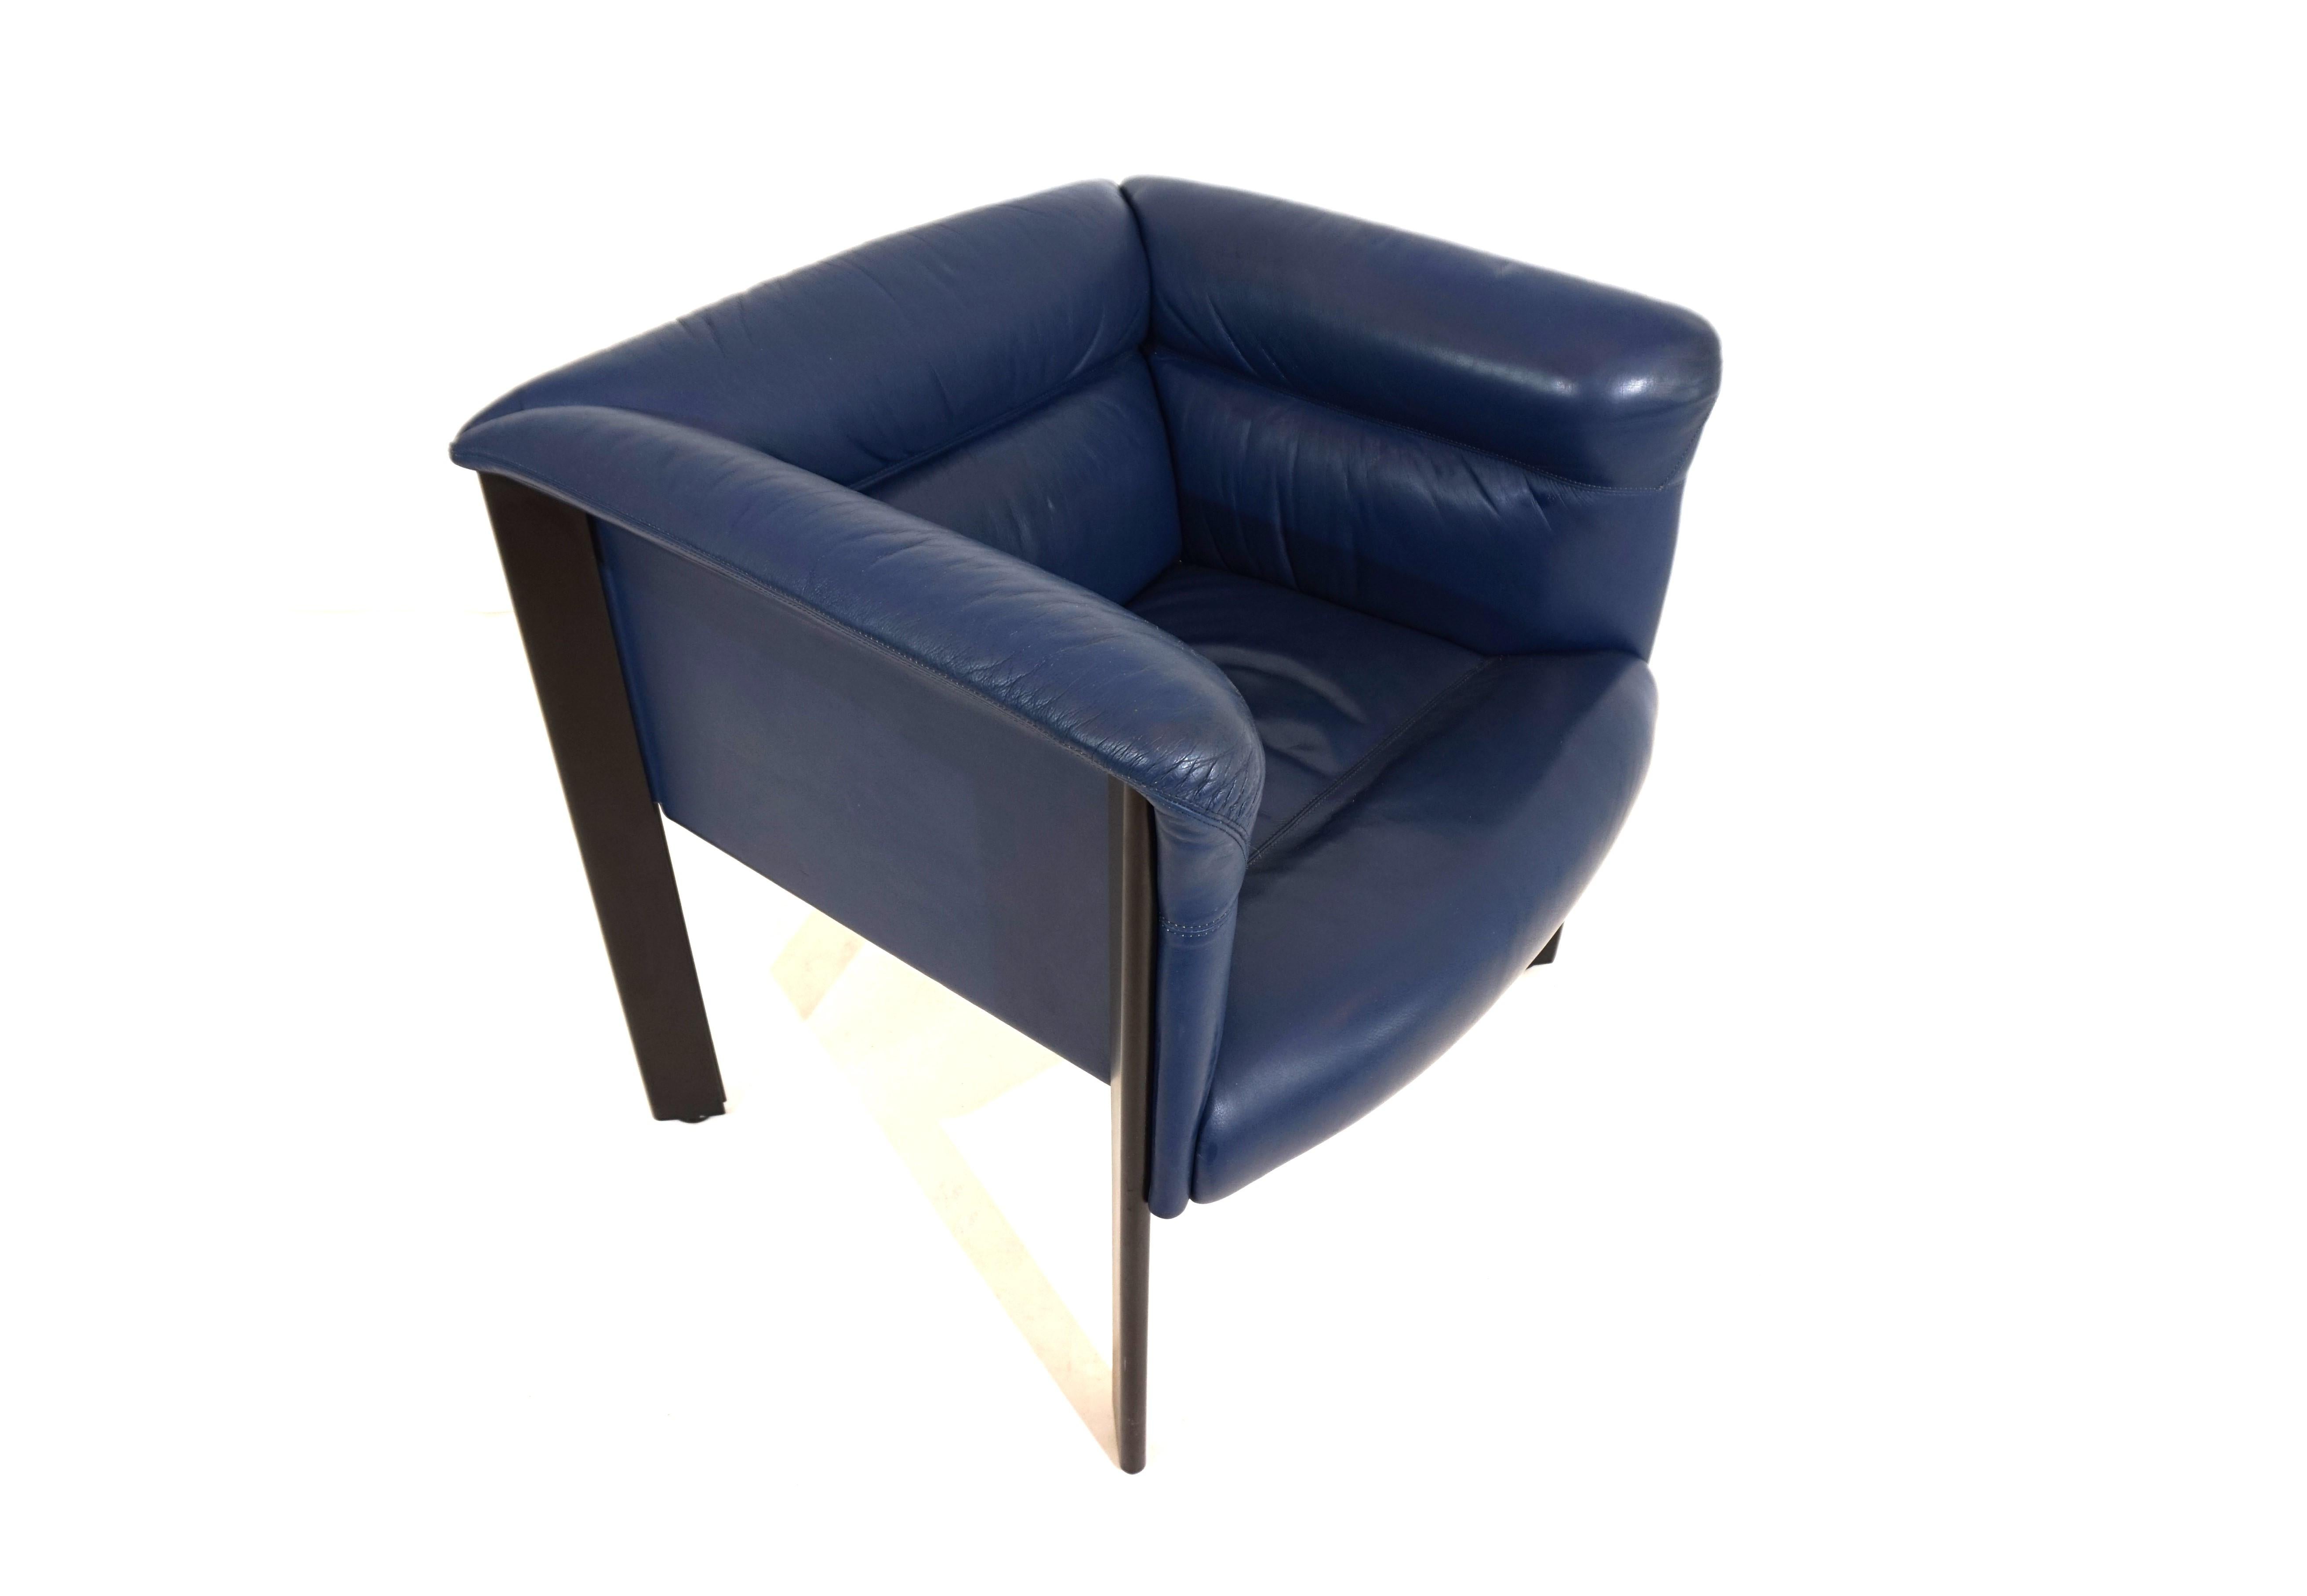 Late 20th Century Poltrona Frau Interlude leather armchair by Marco Zanuso For Sale